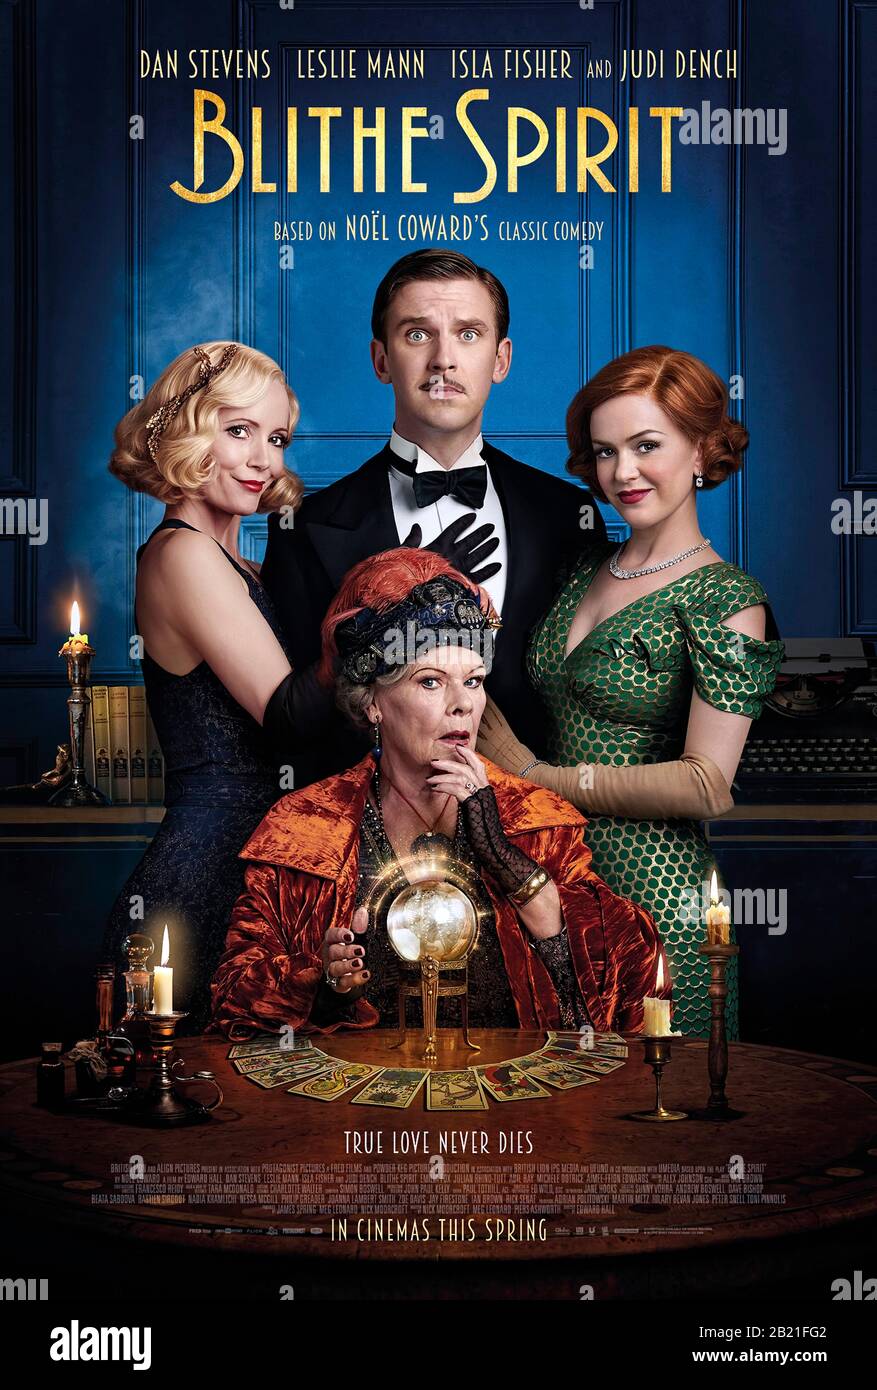 Blithe Spirit (2020) directed by Edward Hall and starring Isla Fisher, Emilia Fox, Dan Stevens and Judi Dench. Noël Coward's comic play about ghosts hits the big screen in a fresh adaptation. Stock Photo